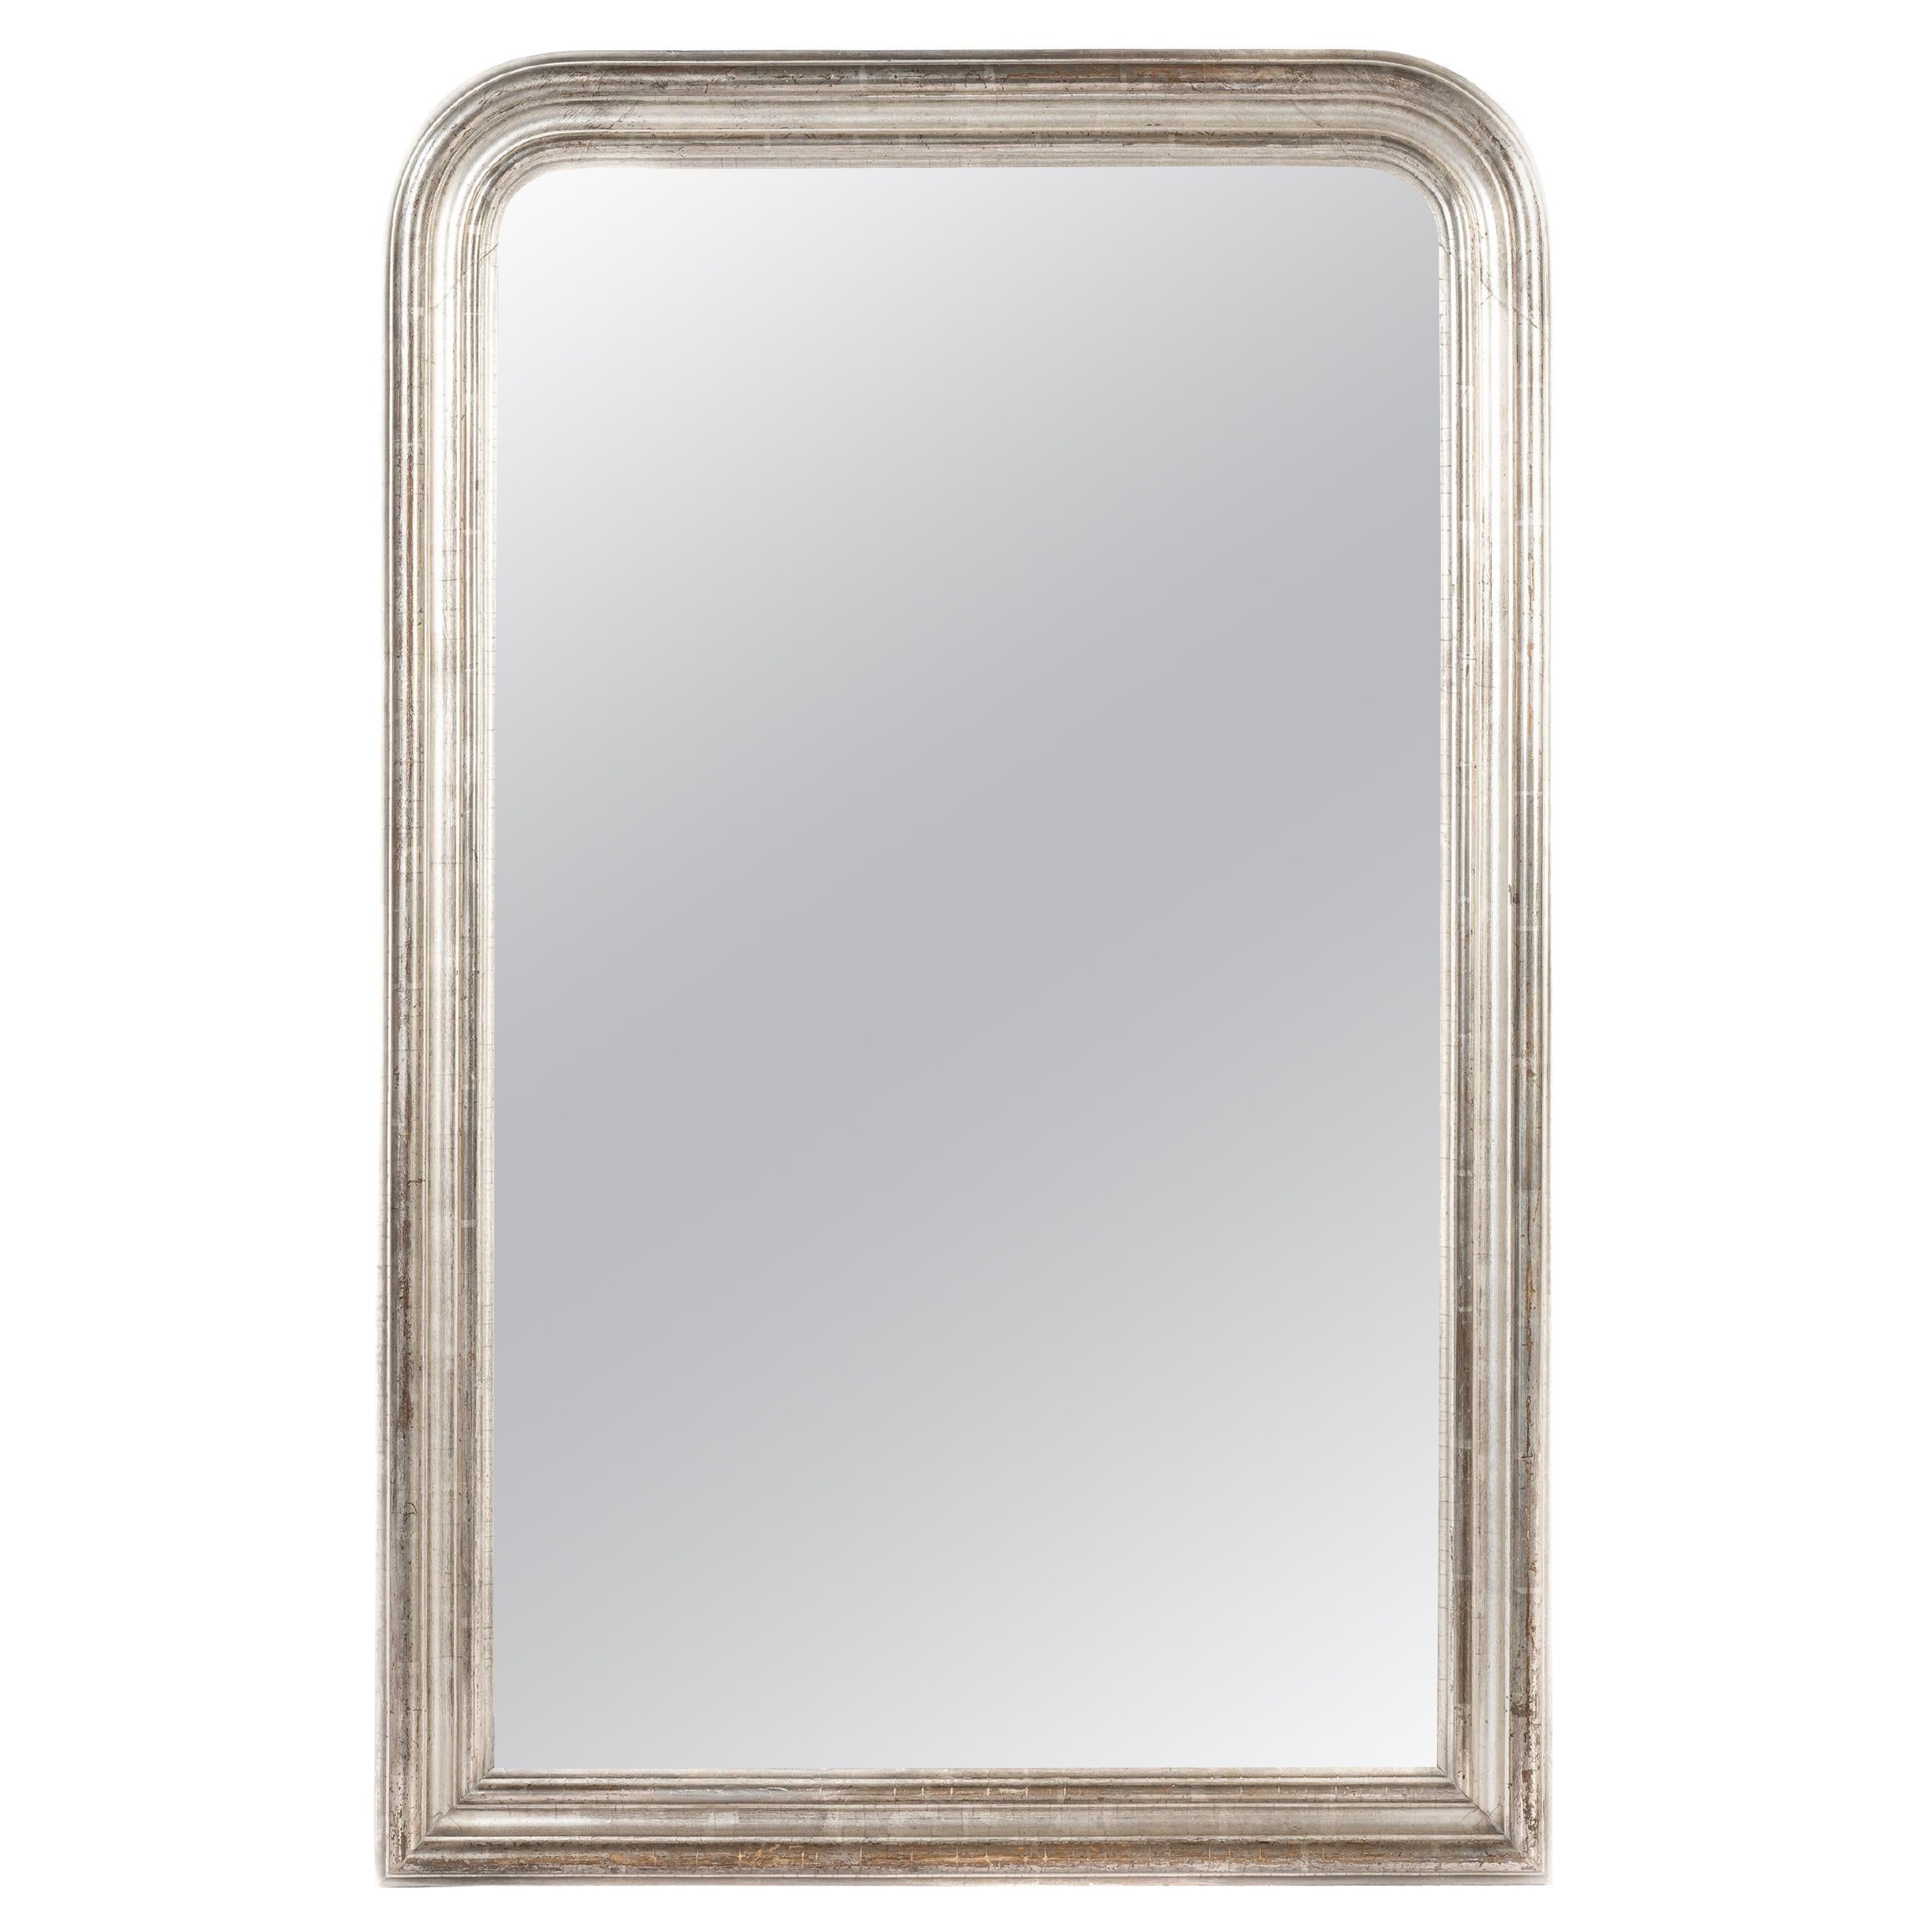 Antique 19th-century elegant silver leaf gilt French Louis Philippe mirror  For Sale